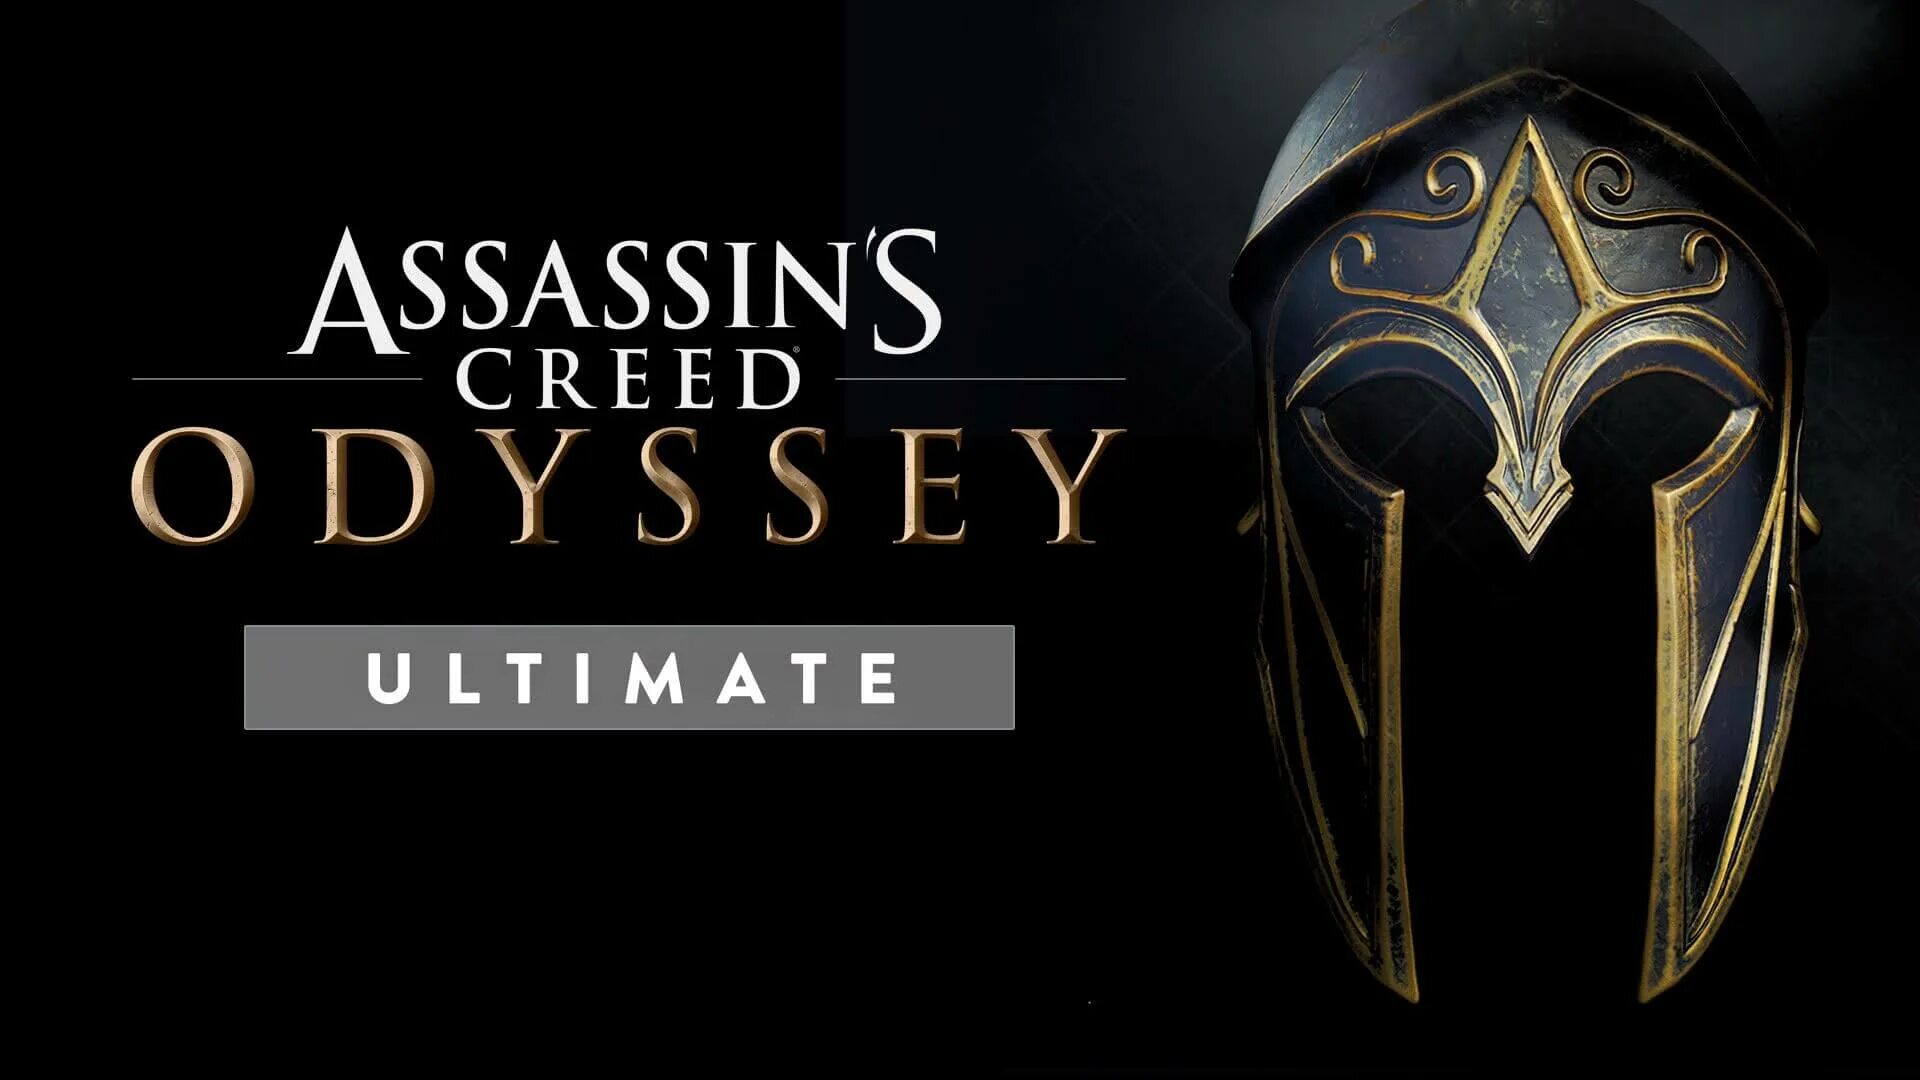 Assassin's Creed Odyssey Ultimate Edition Xbox. Assassin's Creed Odyssey Ultimate Edition ps4. Assassin's Creed Odyssey обложка. Ассасин Одиссея Ultimate. Assassin s creed odyssey editions